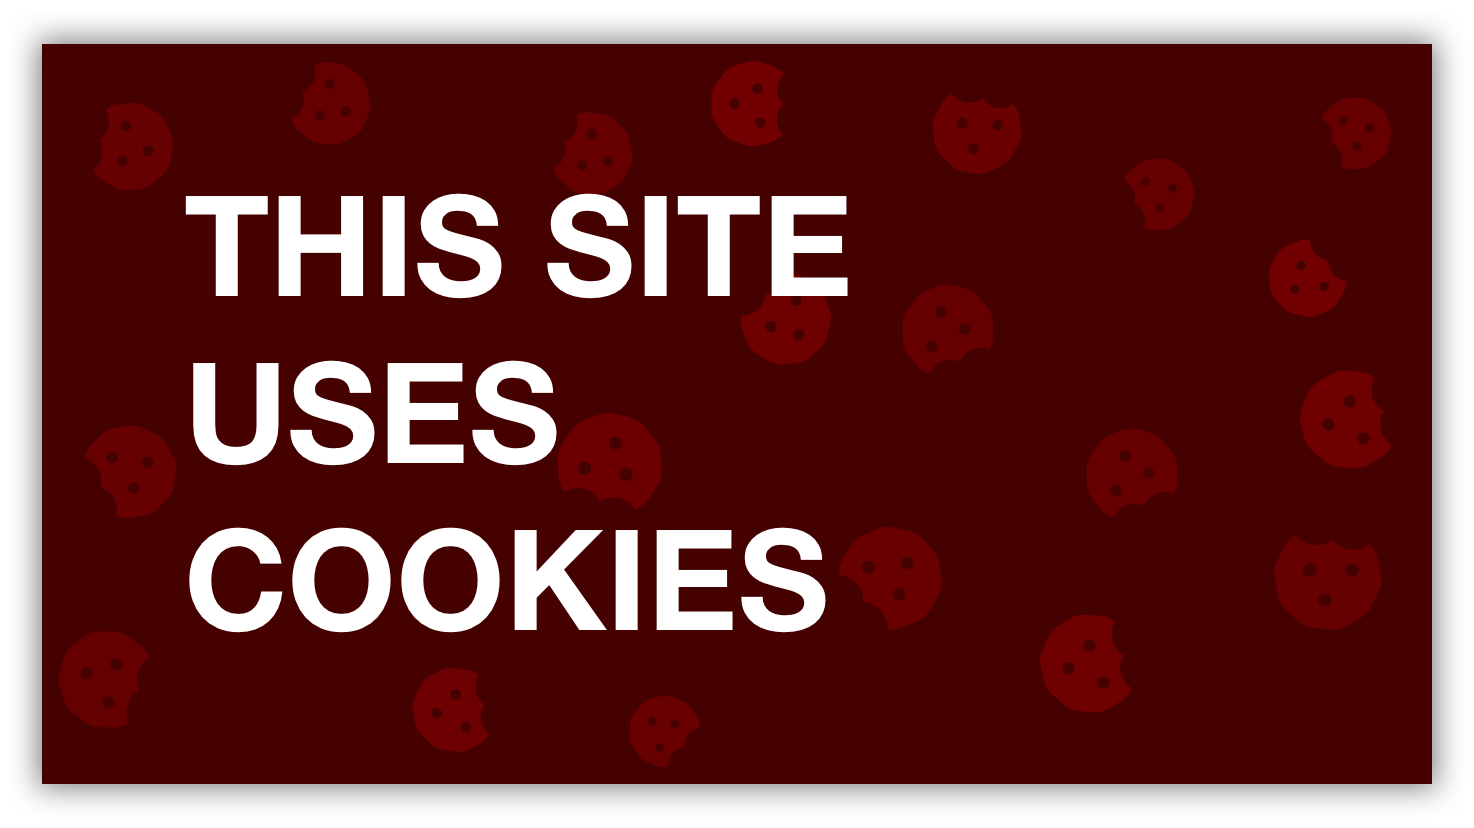 A red title card with the words "This site uses cookies"